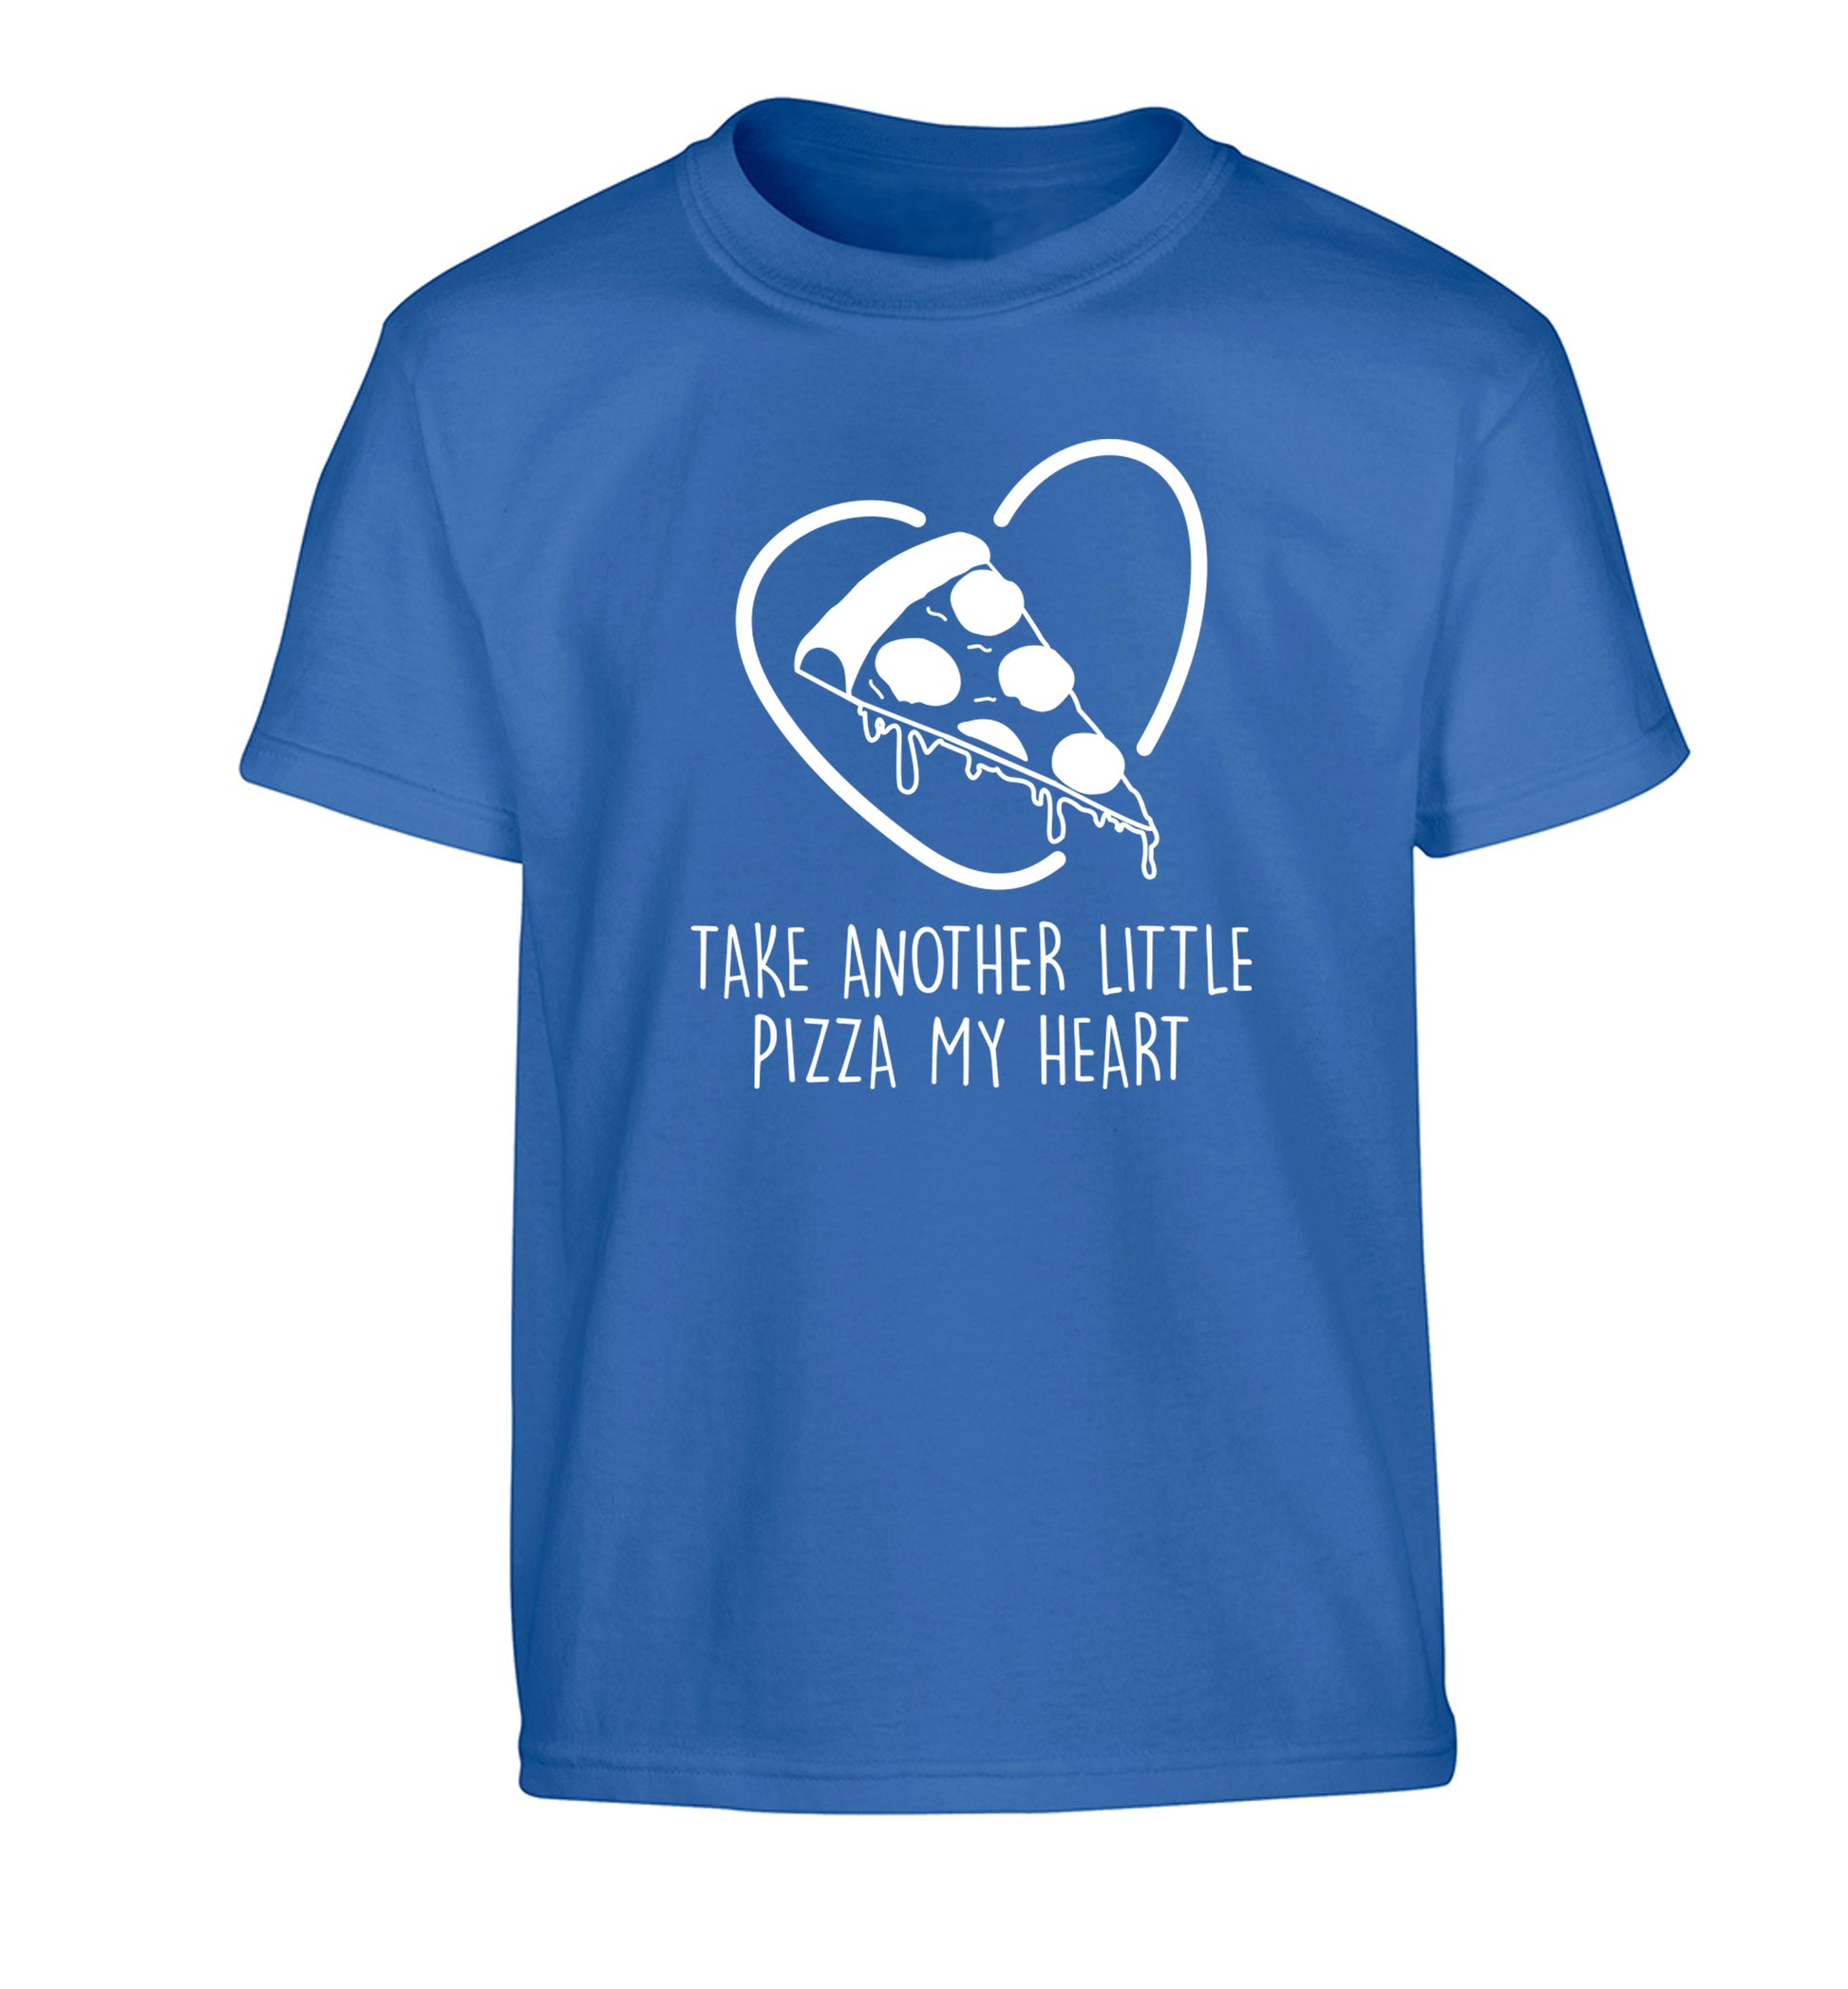 Take another little pizza my heart Children's blue Tshirt 12-13 Years